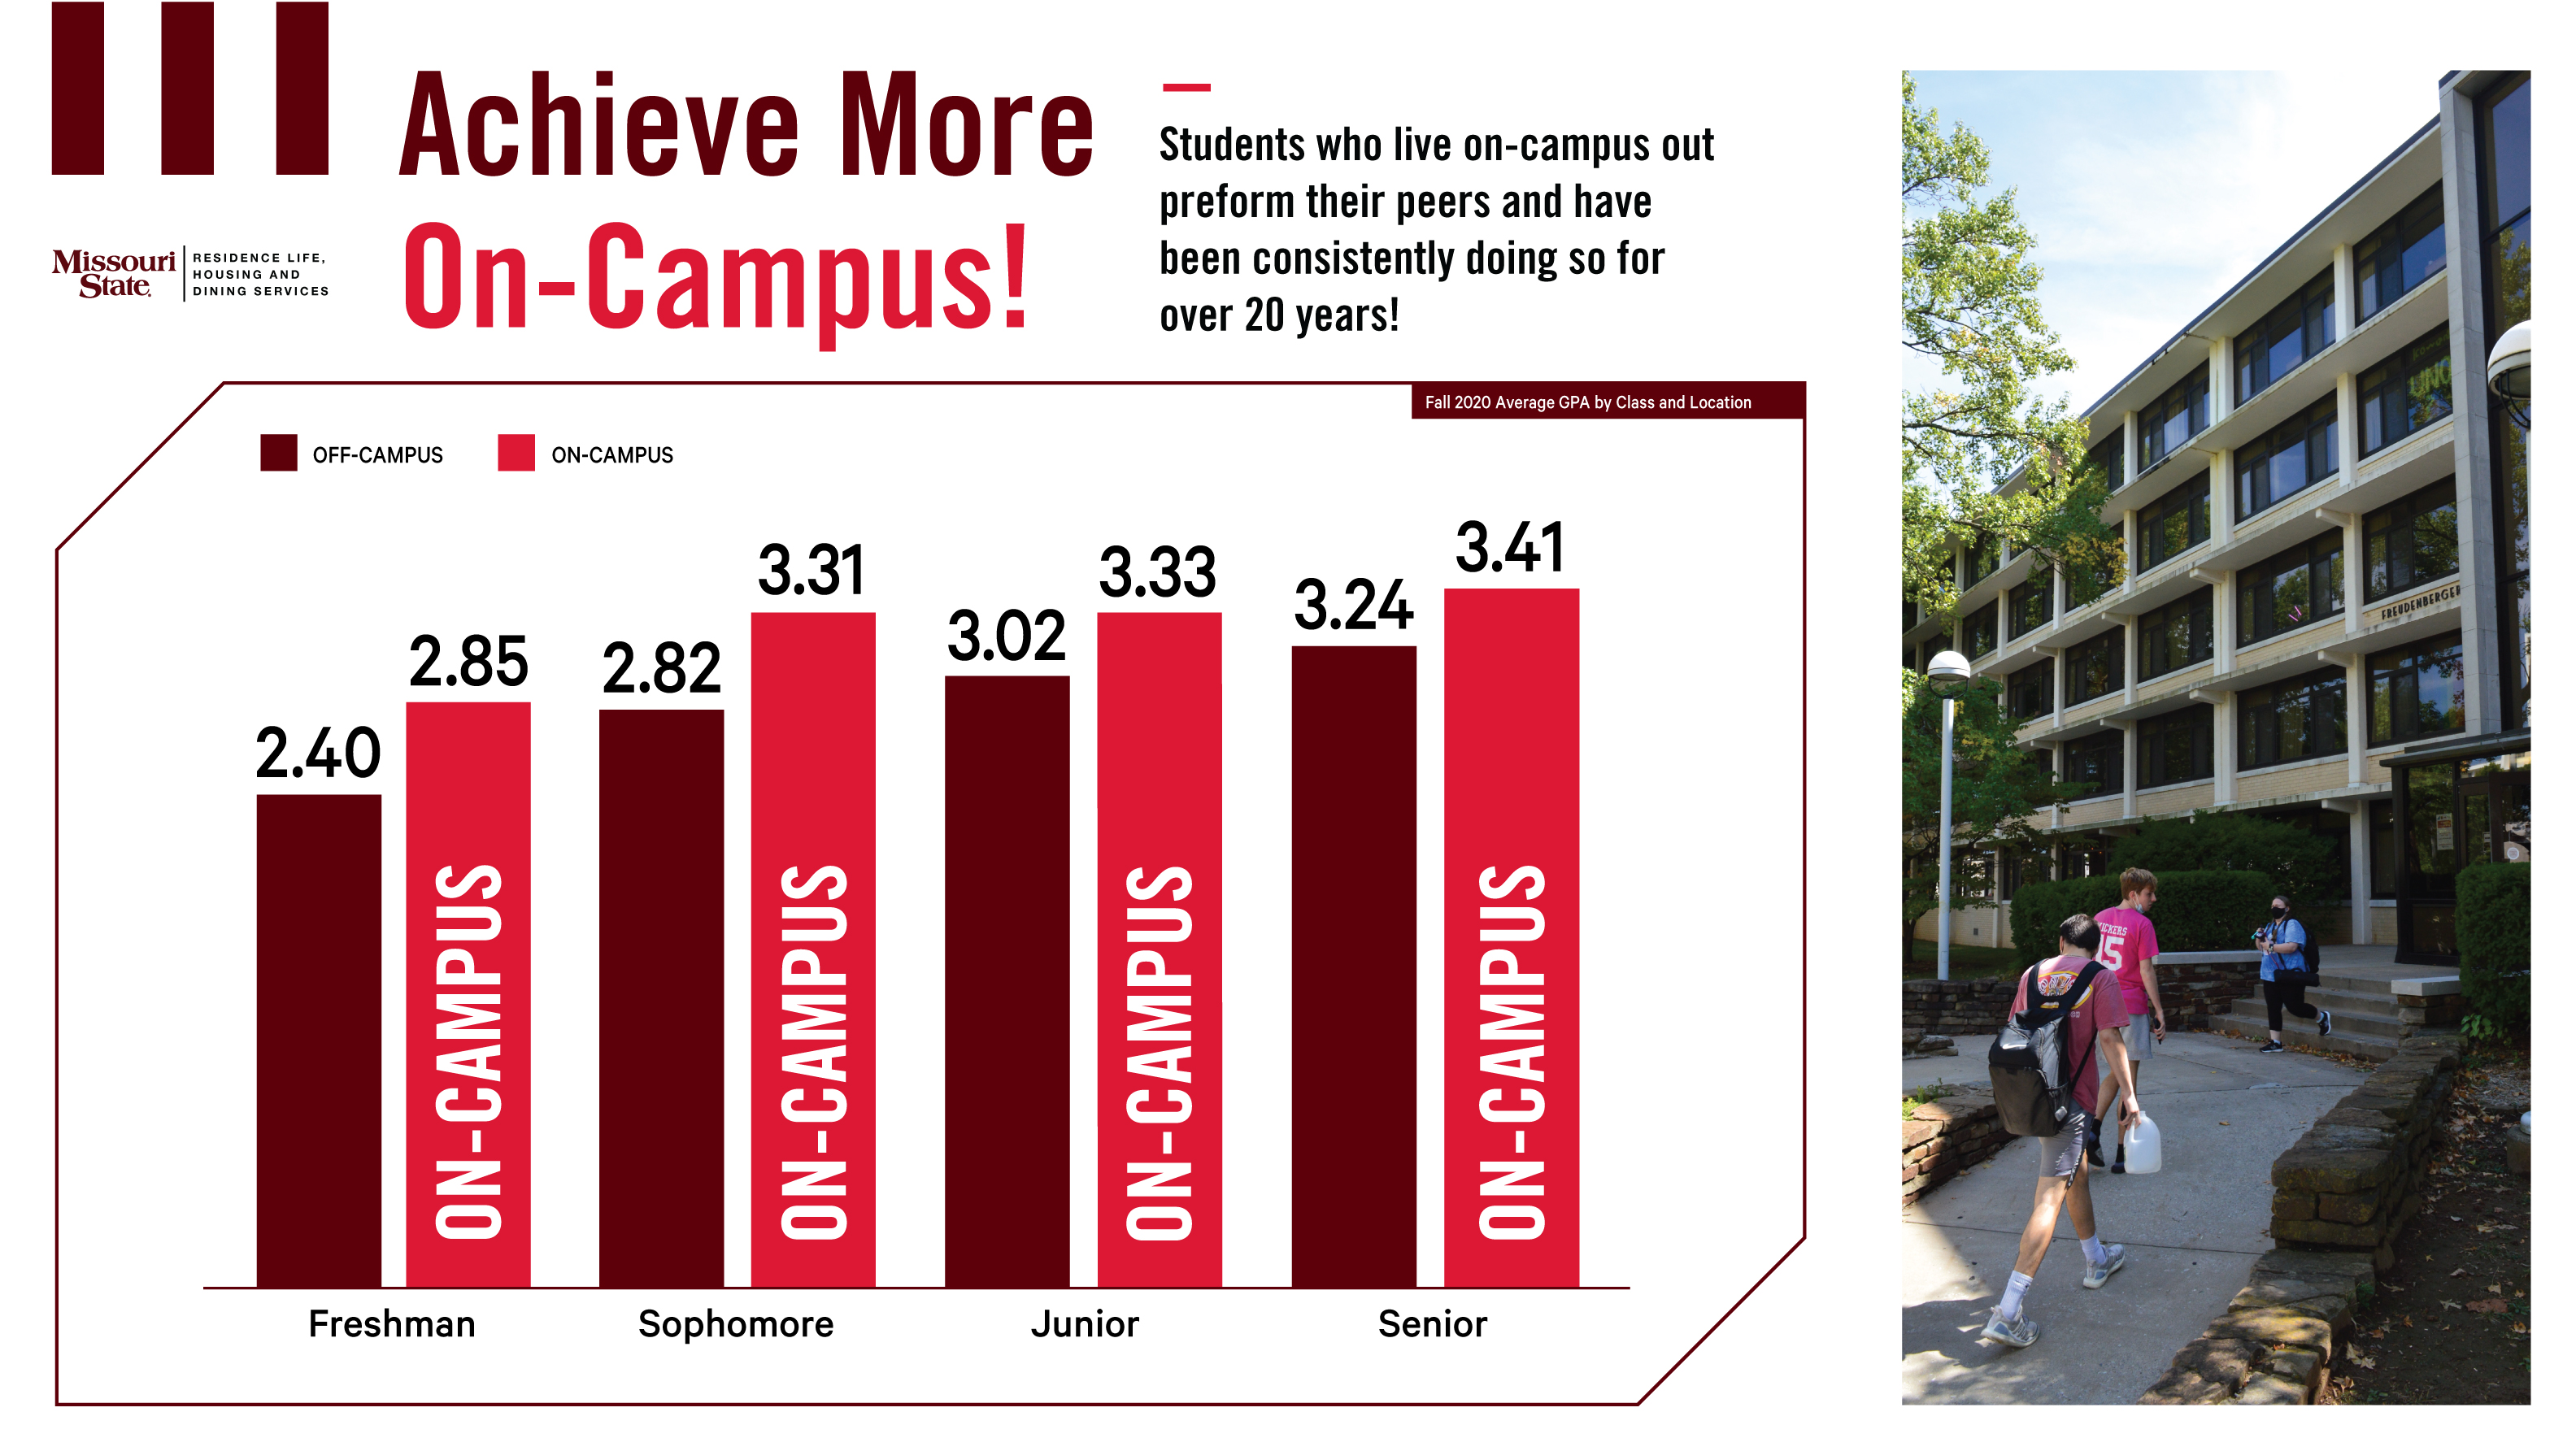 GPA data showing on campus students have higher GPA than off campus students